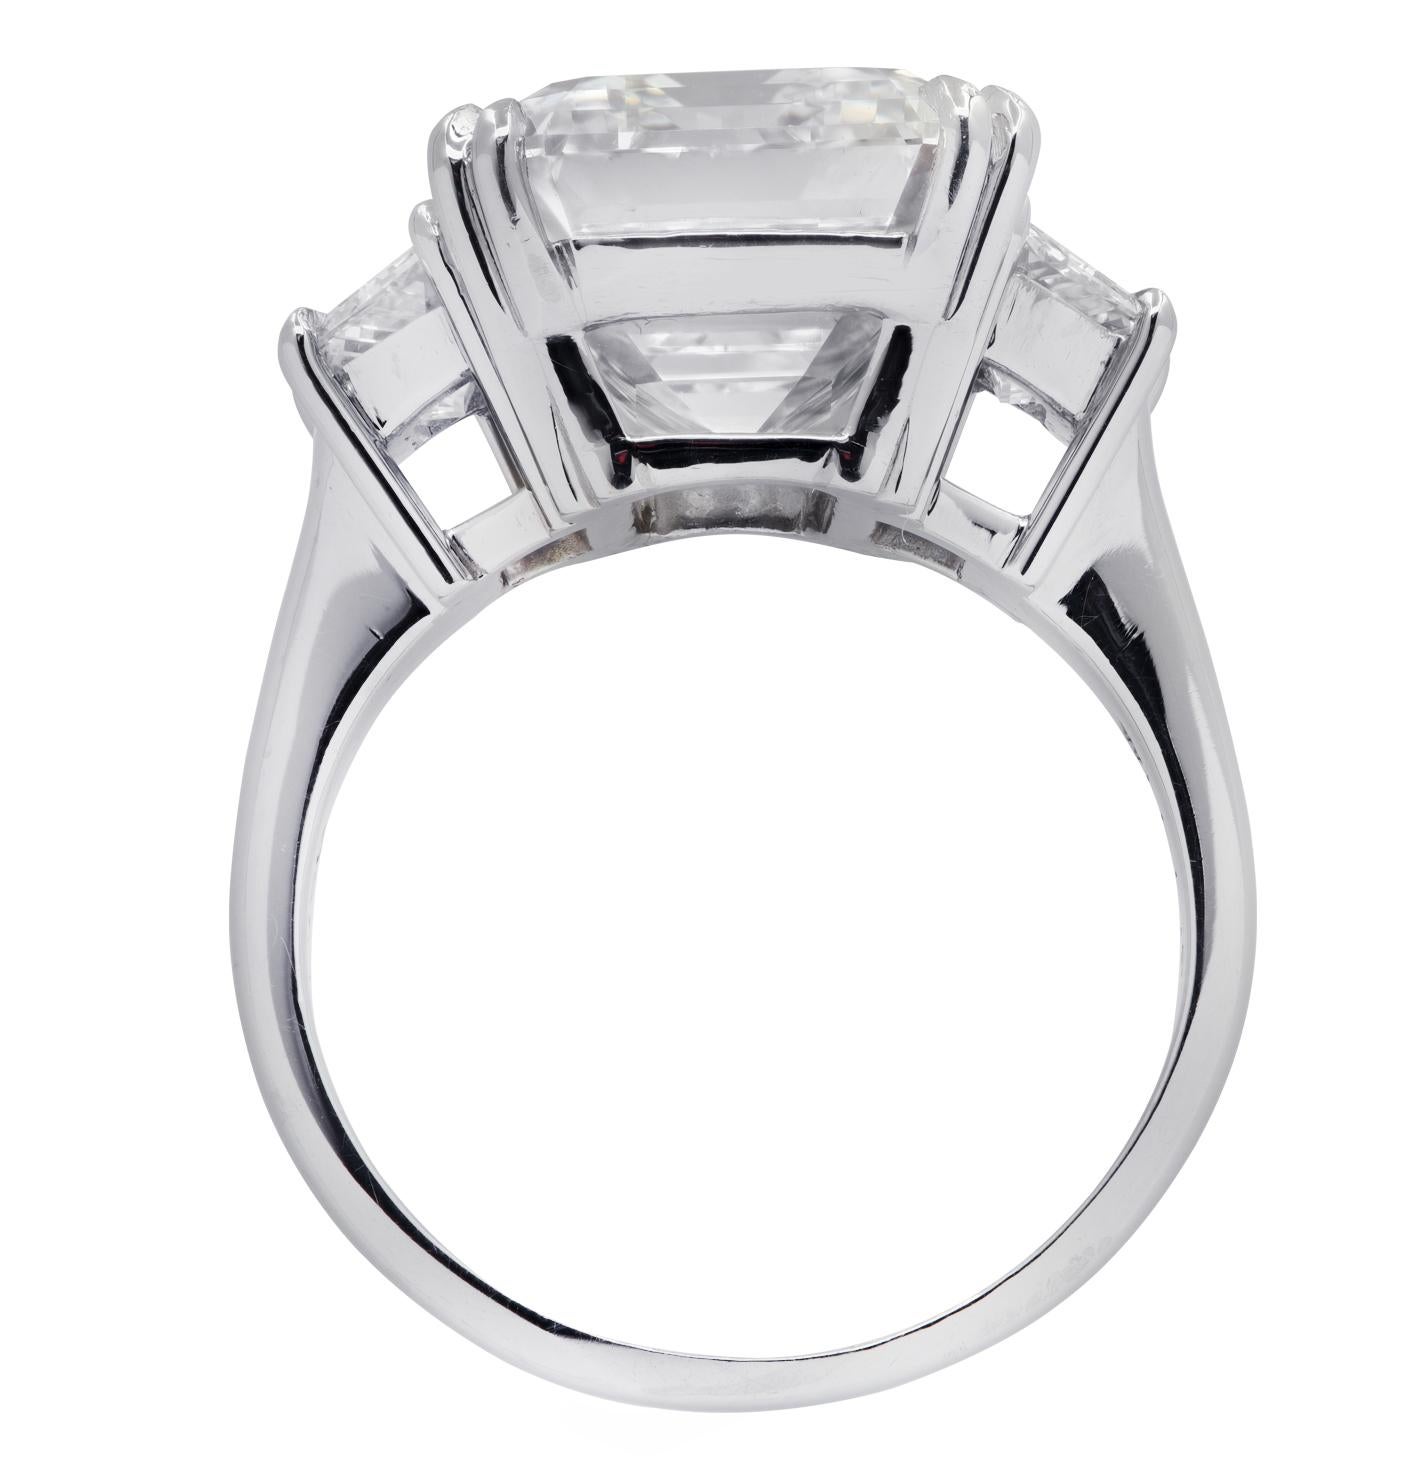 Exquisite Vivid Diamonds engagement ring crafted in platinum, featuring a spectacular GIA certified emerald cut diamond weighing 8.57 carats, H color, VS1 clarity,  adorned with two carefully selected and perfectly matched trapezoid diamonds